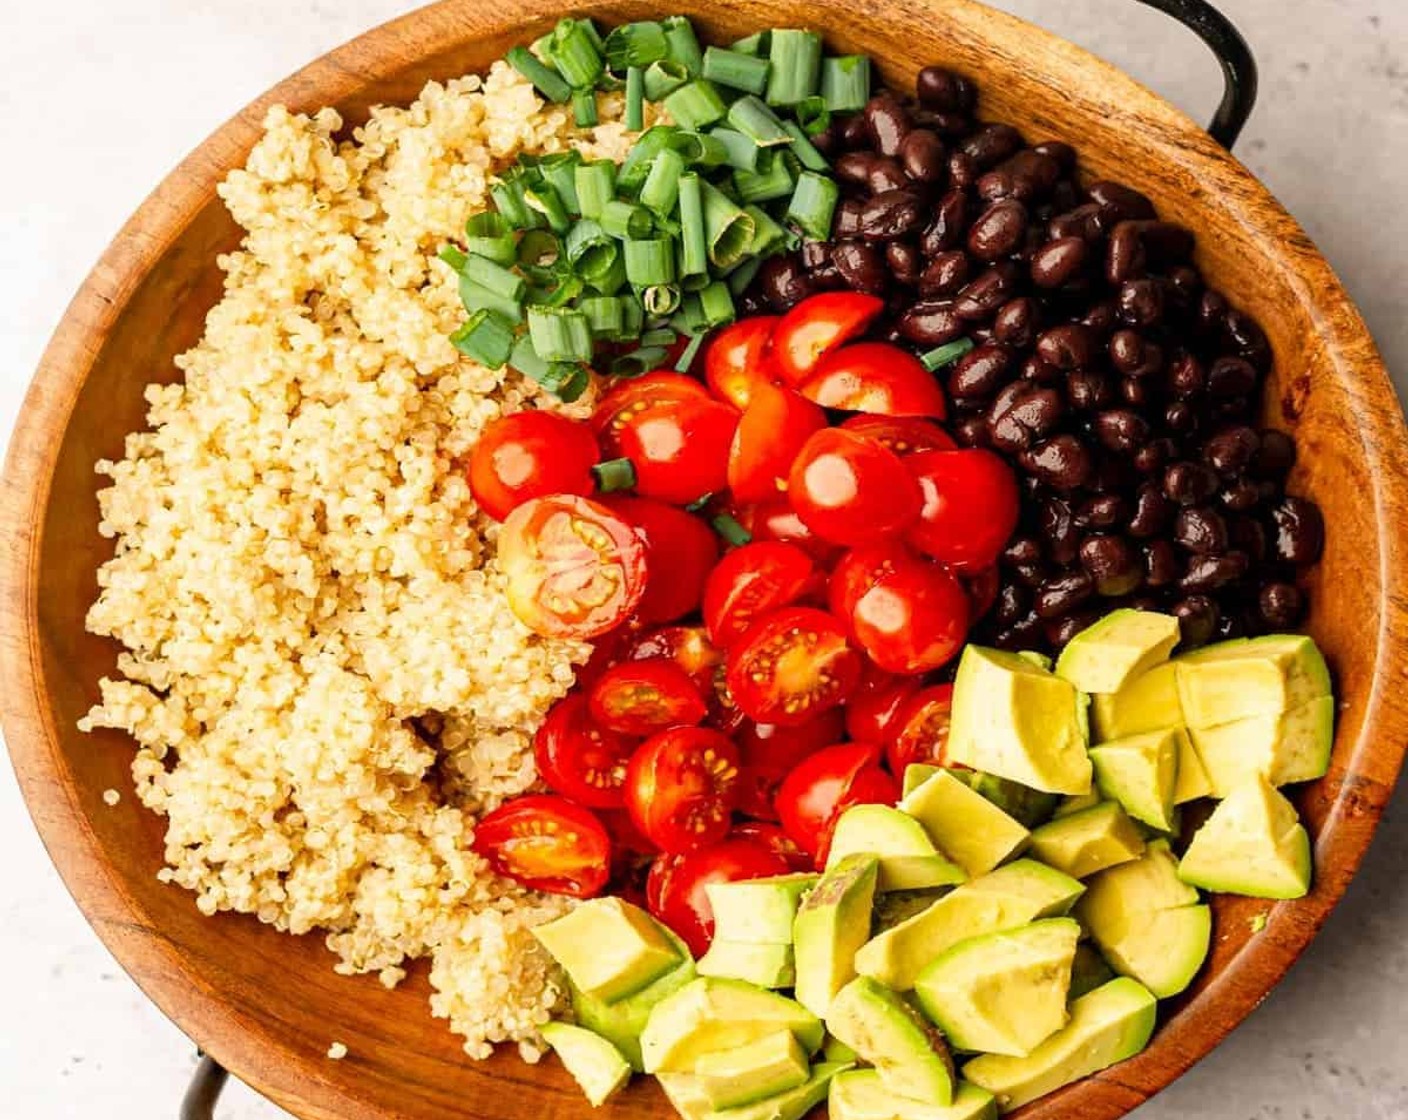 step 1 In a large bowl, add the Quinoa (3 cups), Black Beans (1 can), Cherry Tomatoes (2 cups), Avocado (1), and Scallion (1/4 cup).